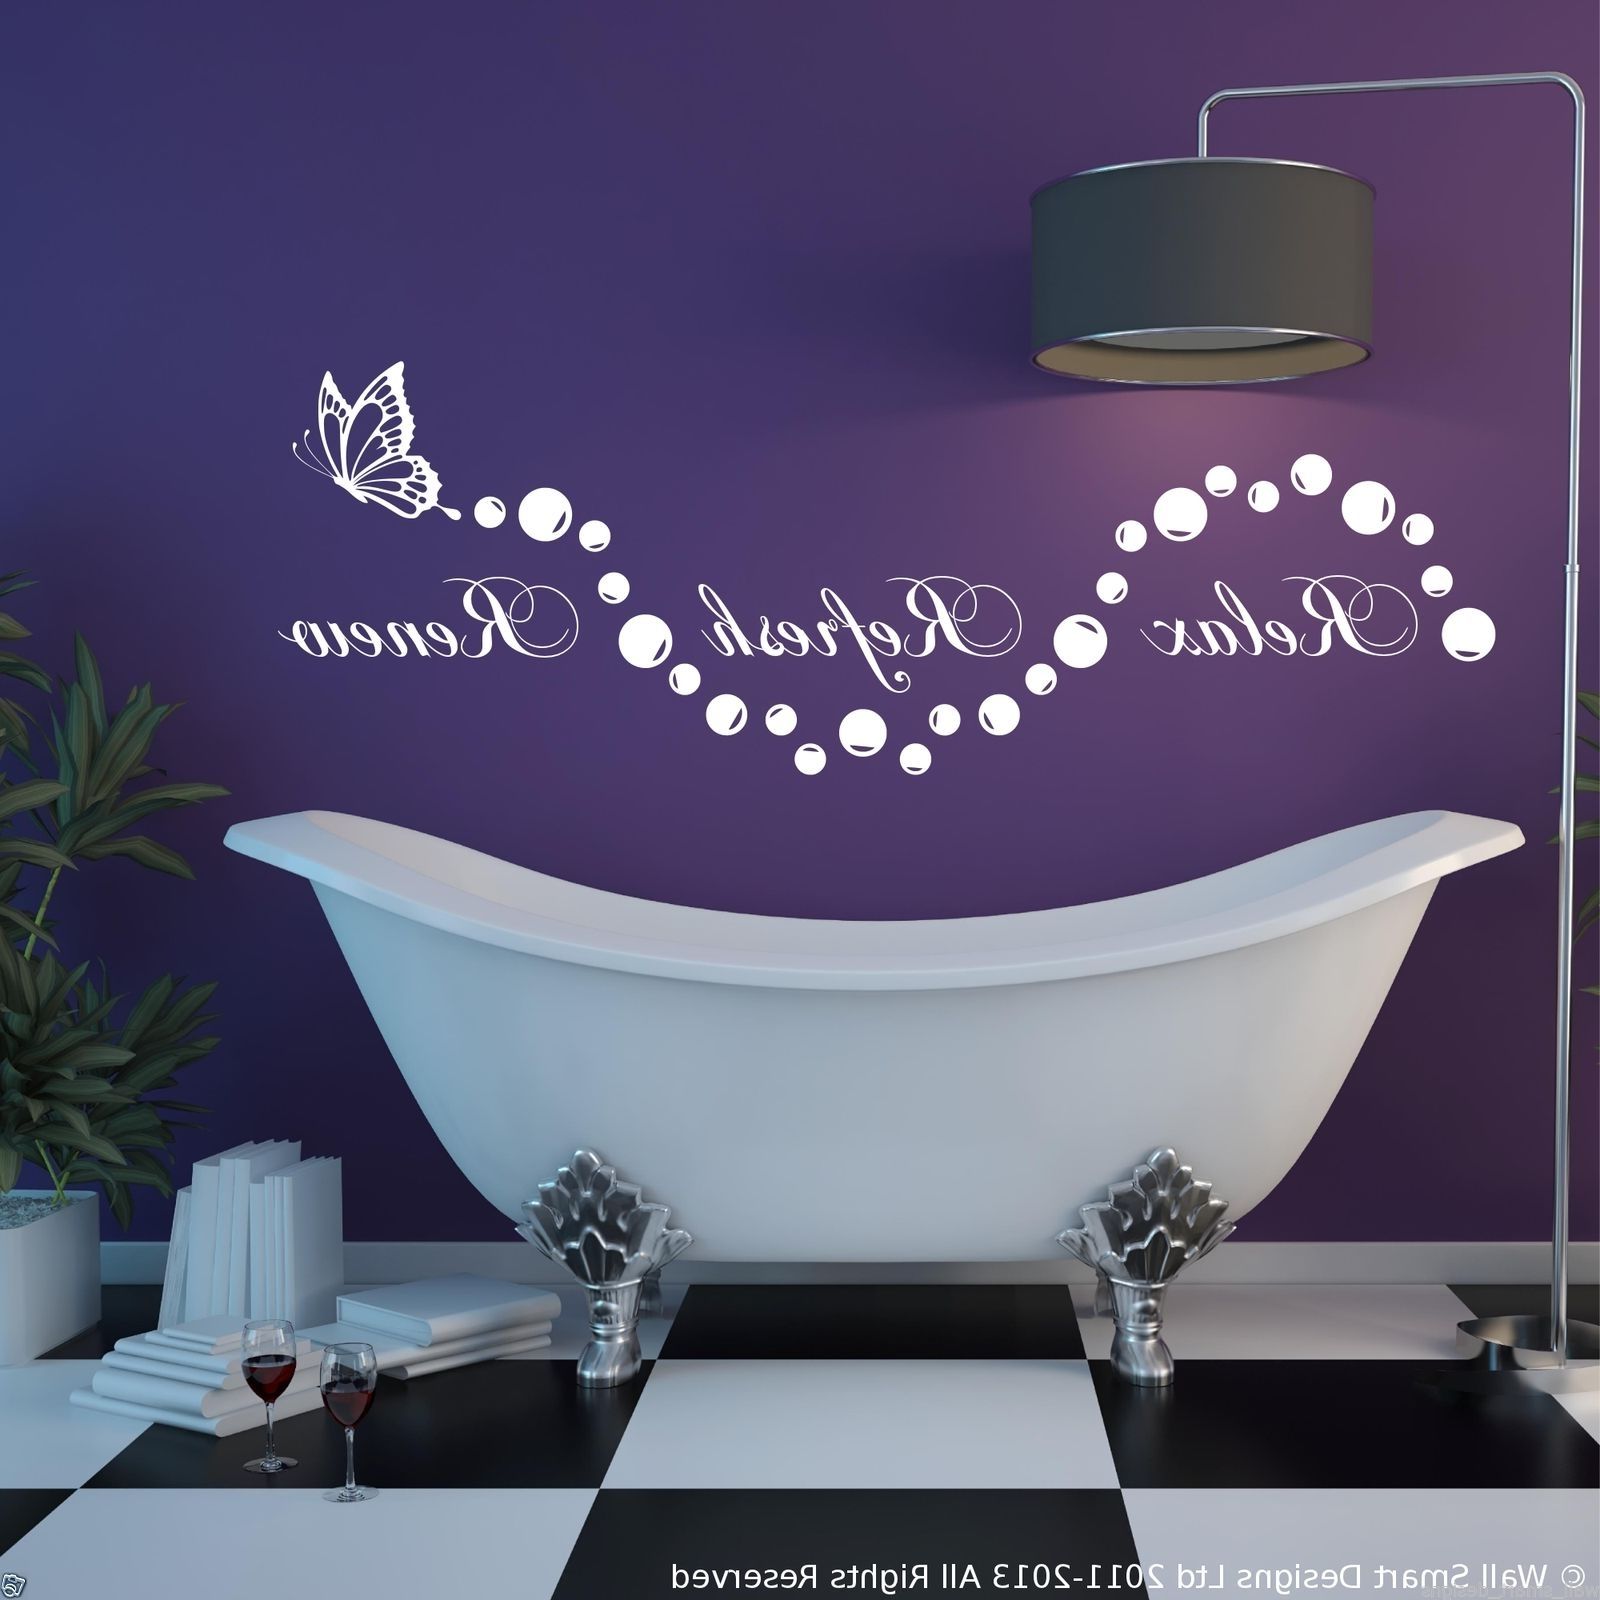 Relax Wall Art Intended For Famous Relax Bathroom Bubbles En Suite Wall Art Sticker Quote Decal Stencil (View 3 of 20)